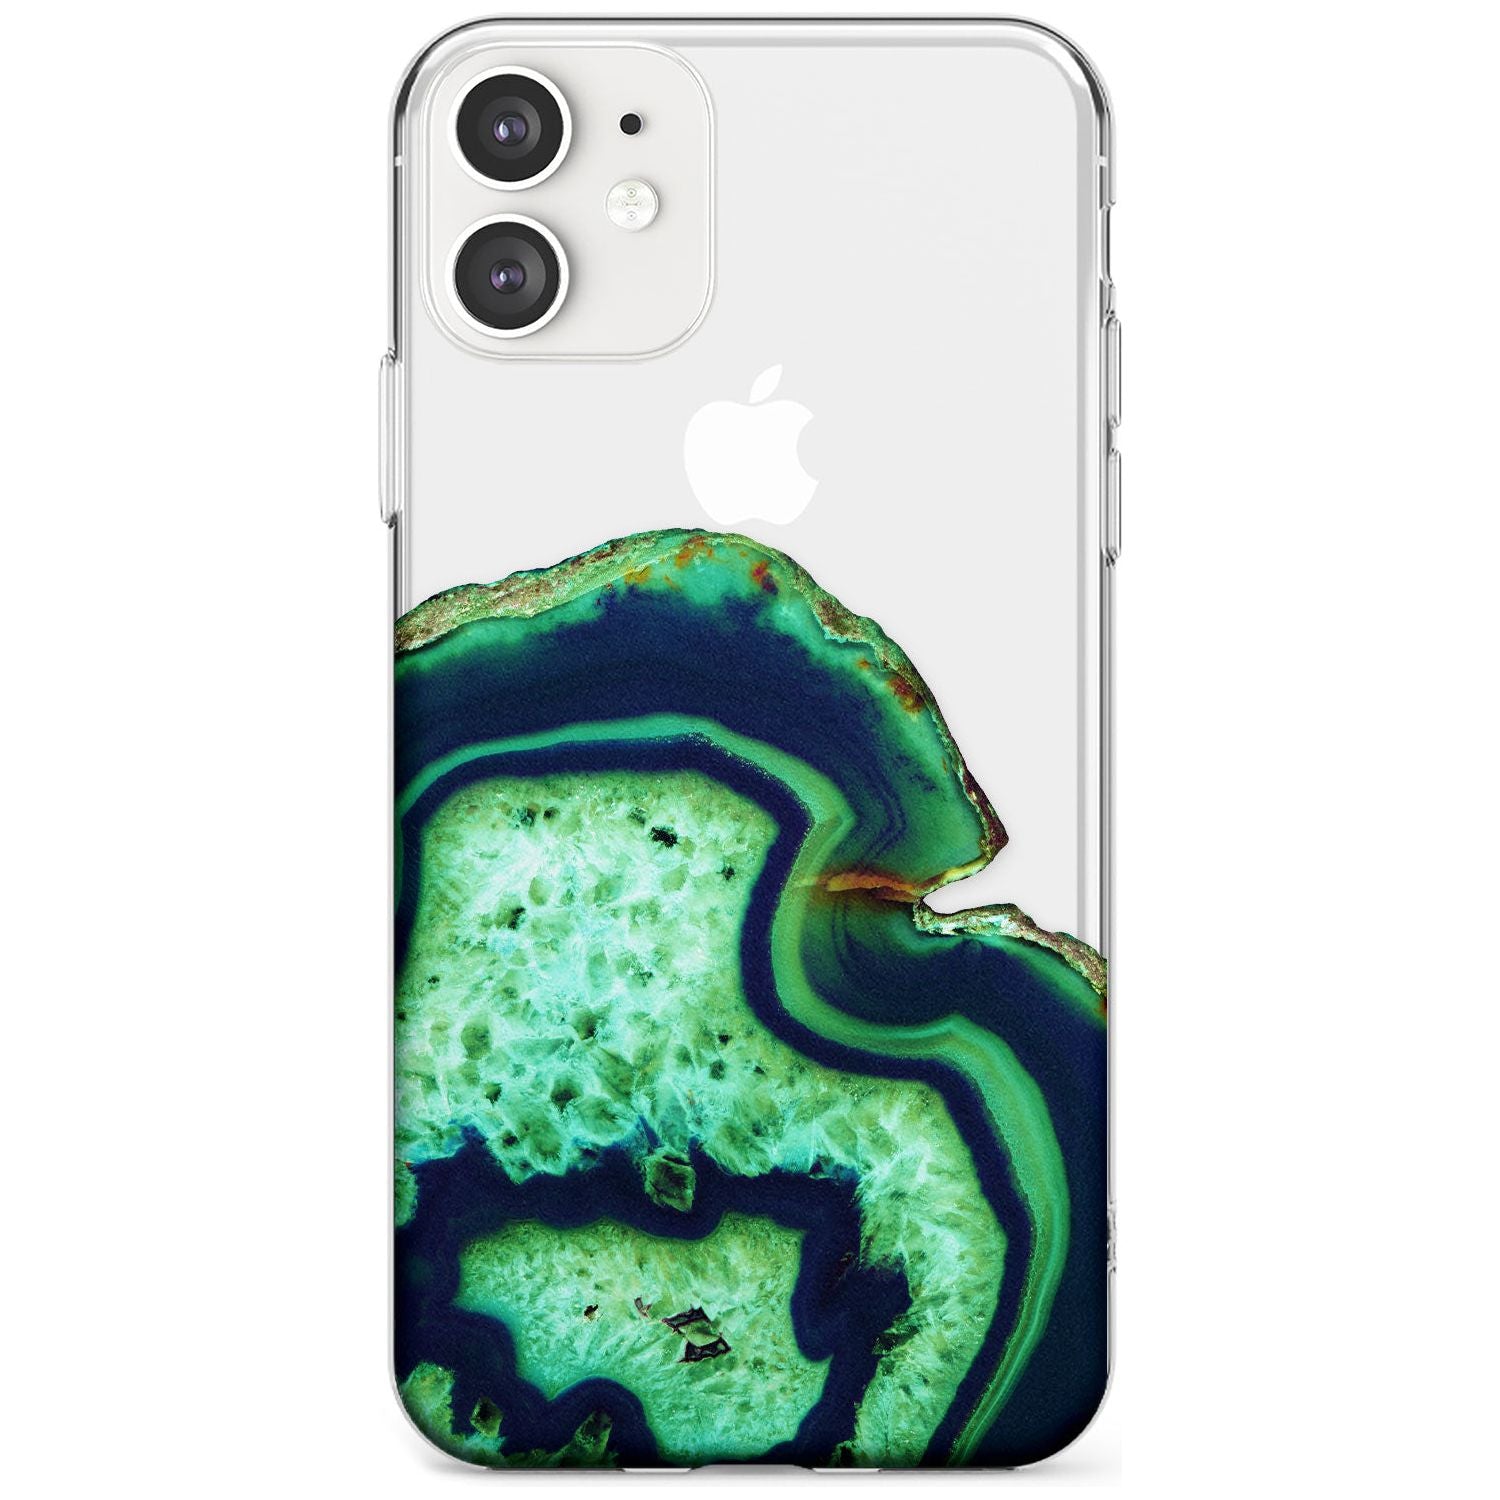 Neon Green & Blue Agate Crystal Transparent Design Slim TPU Phone Case for iPhone 11